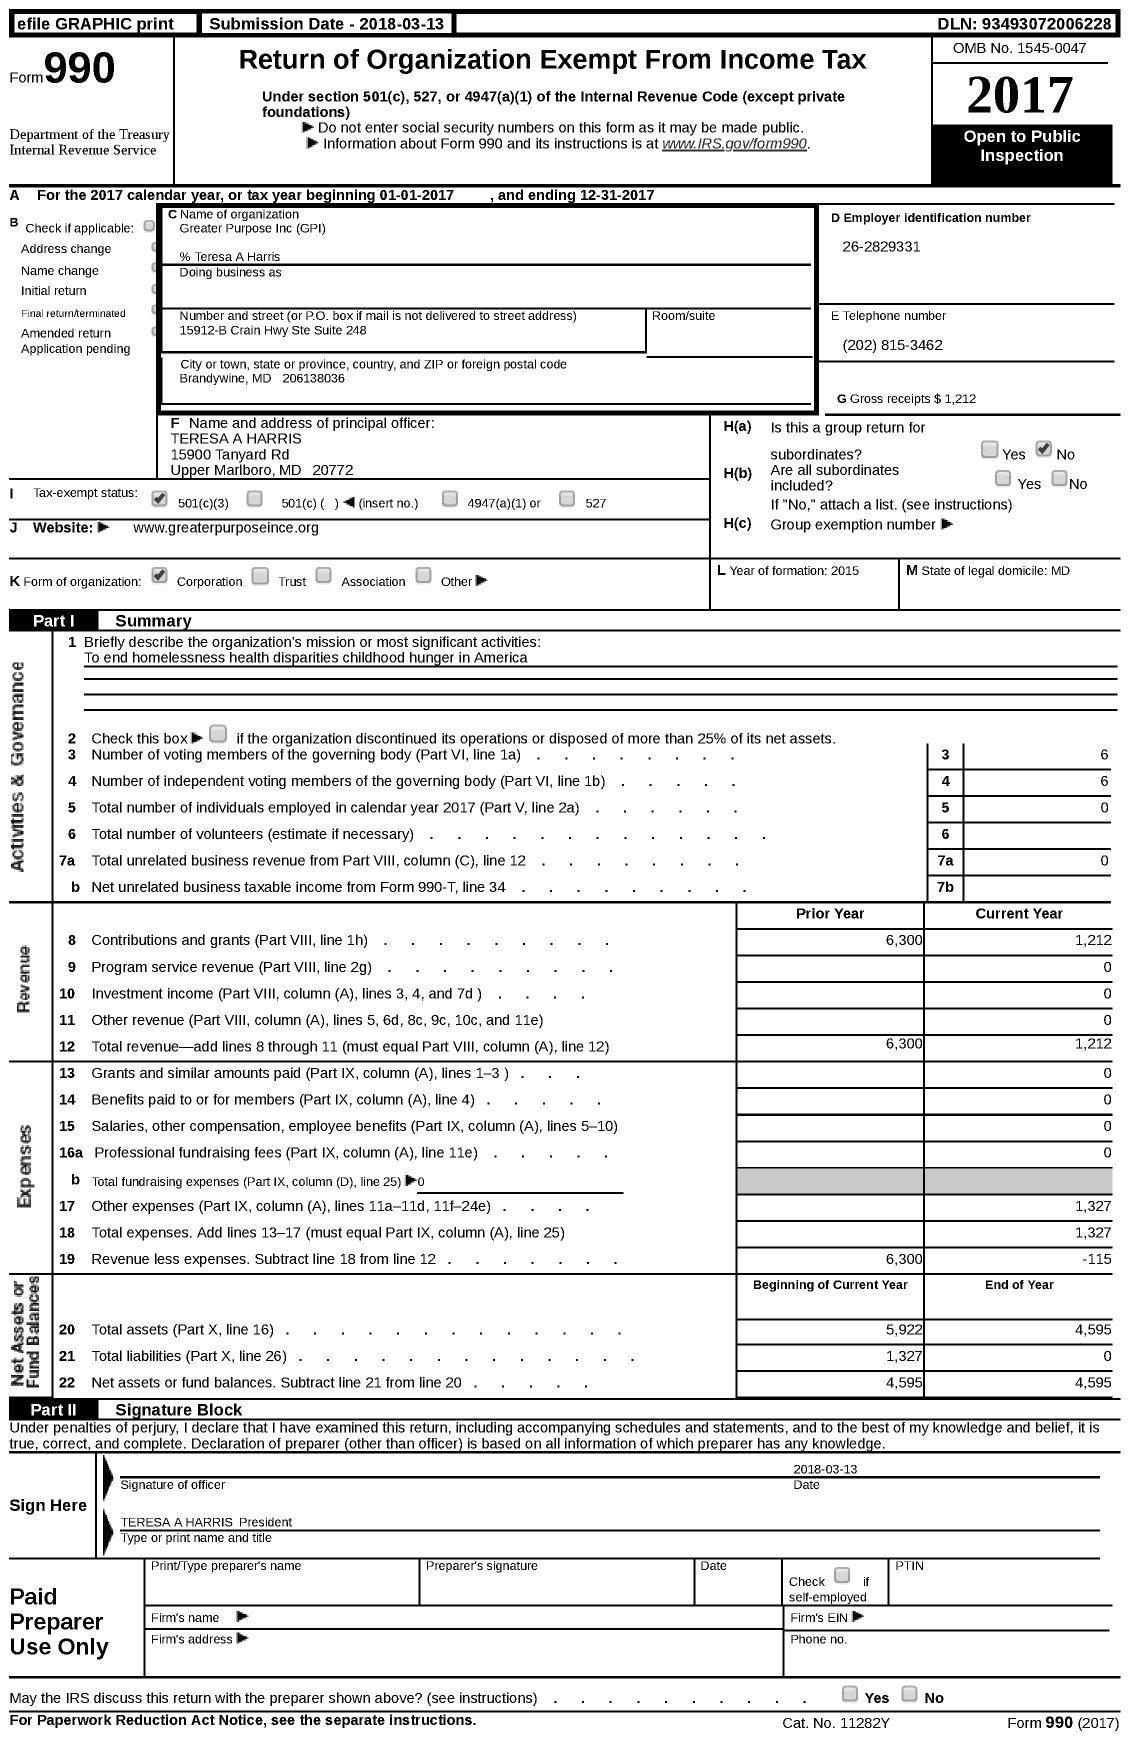 Image of first page of 2017 Form 990 for Greater Purpose (GPI)